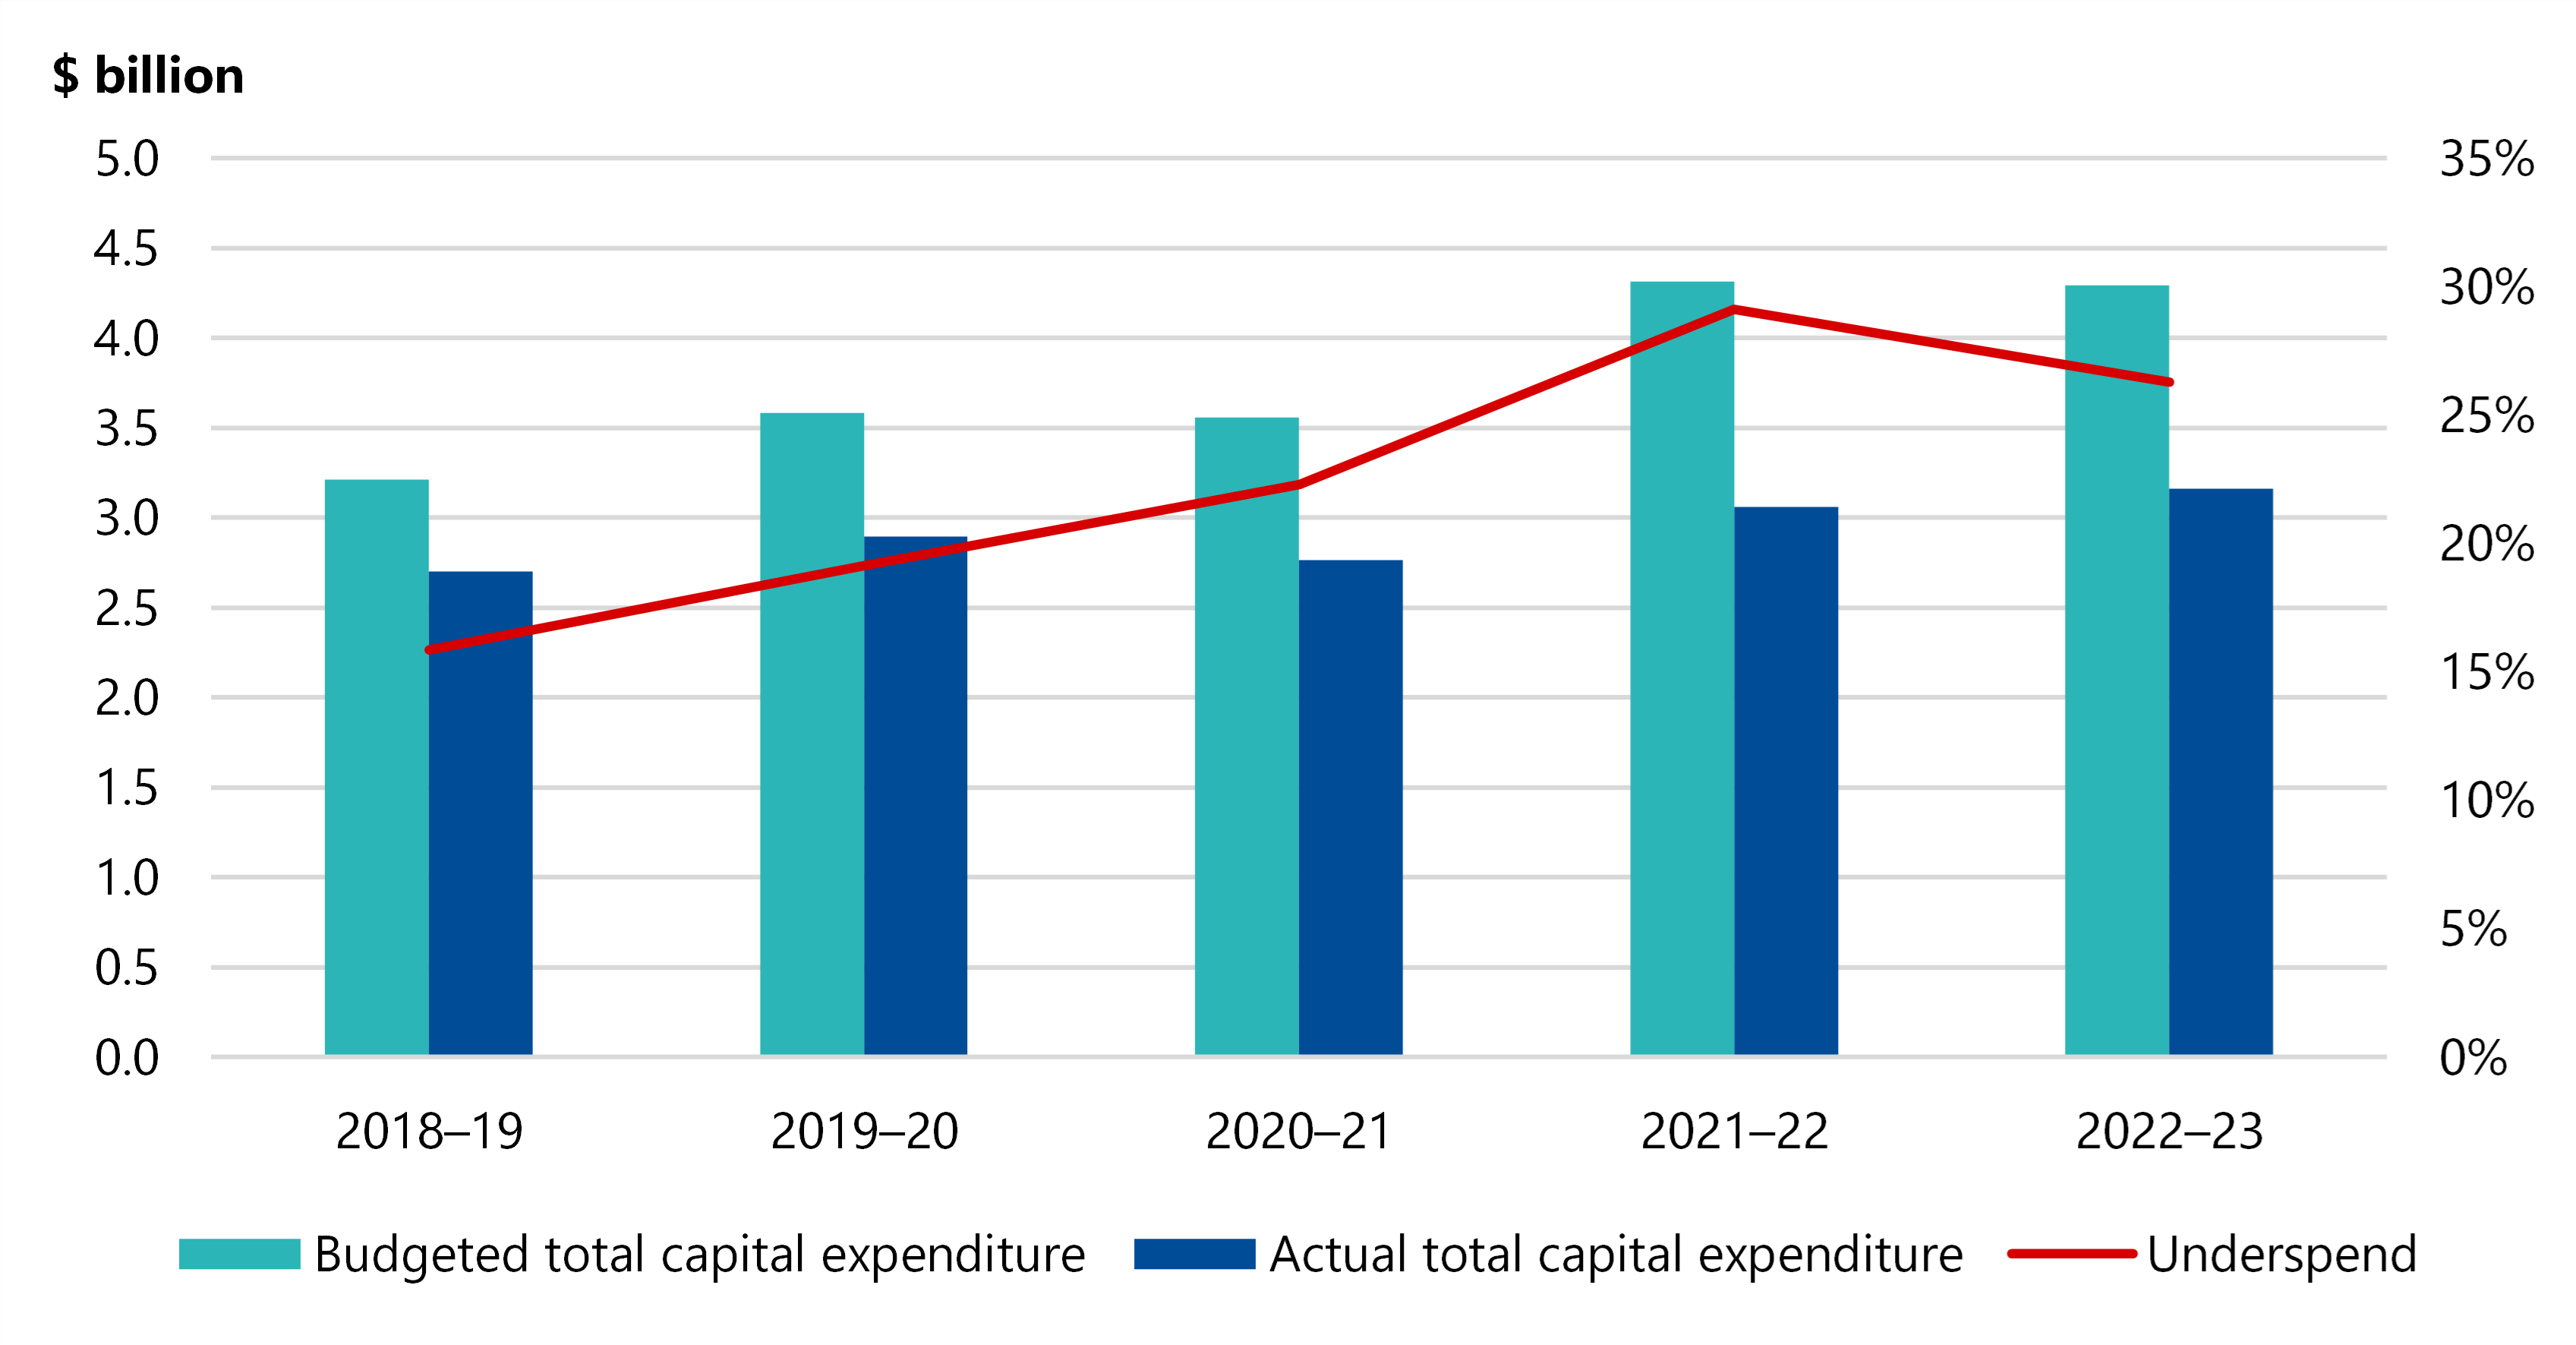 Figure 15 is a stacked combo bar chart showing that, in 2018–19, the sector's budgeted total capital expenditure was over $3.0 billion, while its actual total capital expenditure was about $2.7 billion, an underspend of just under 16%. In 2019–20, the budgeted total capital expenditure was over $3.5 billion, while actual total capital expenditure was about $2.9 billion, an underspend of around 19%. In 2020–21, the budgeted total capital expenditure was again a bit over $3.5 billion, while actual total capital expenditure was about $2.9 billion, an underspend of a bit over 22%. In 2021–22, the budgeted total capital expenditure was about $4.3 billion, while actual total capital expenditure was about $3.1 billion, an underspend of around 29%. In 2022–23, the budgeted total capital expenditure was again about $4.3 billion, while actual total capital expenditure was about $3.2 billion, an underspend of about 26%. 